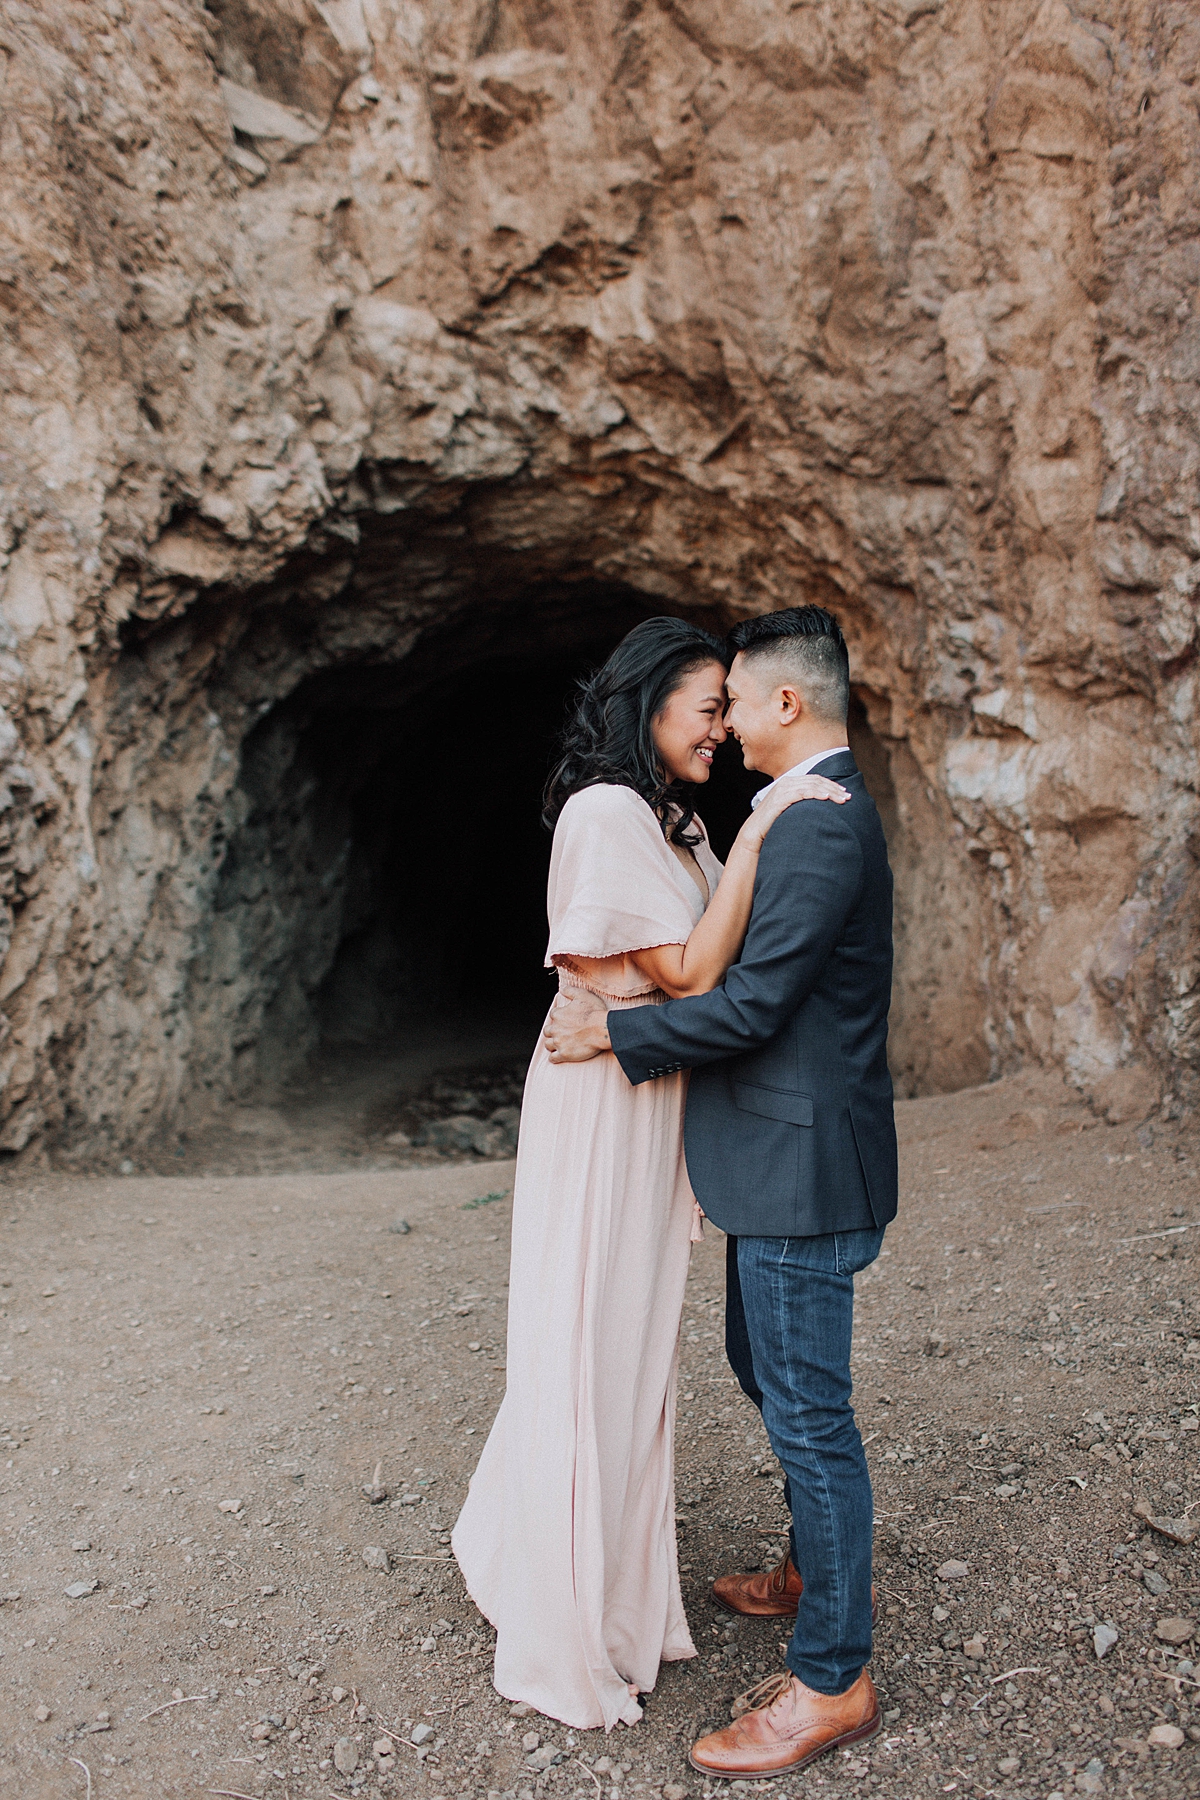 Los Angeles Romantic Outdoor Engagement Photos in the Mountains, candid engagement photos